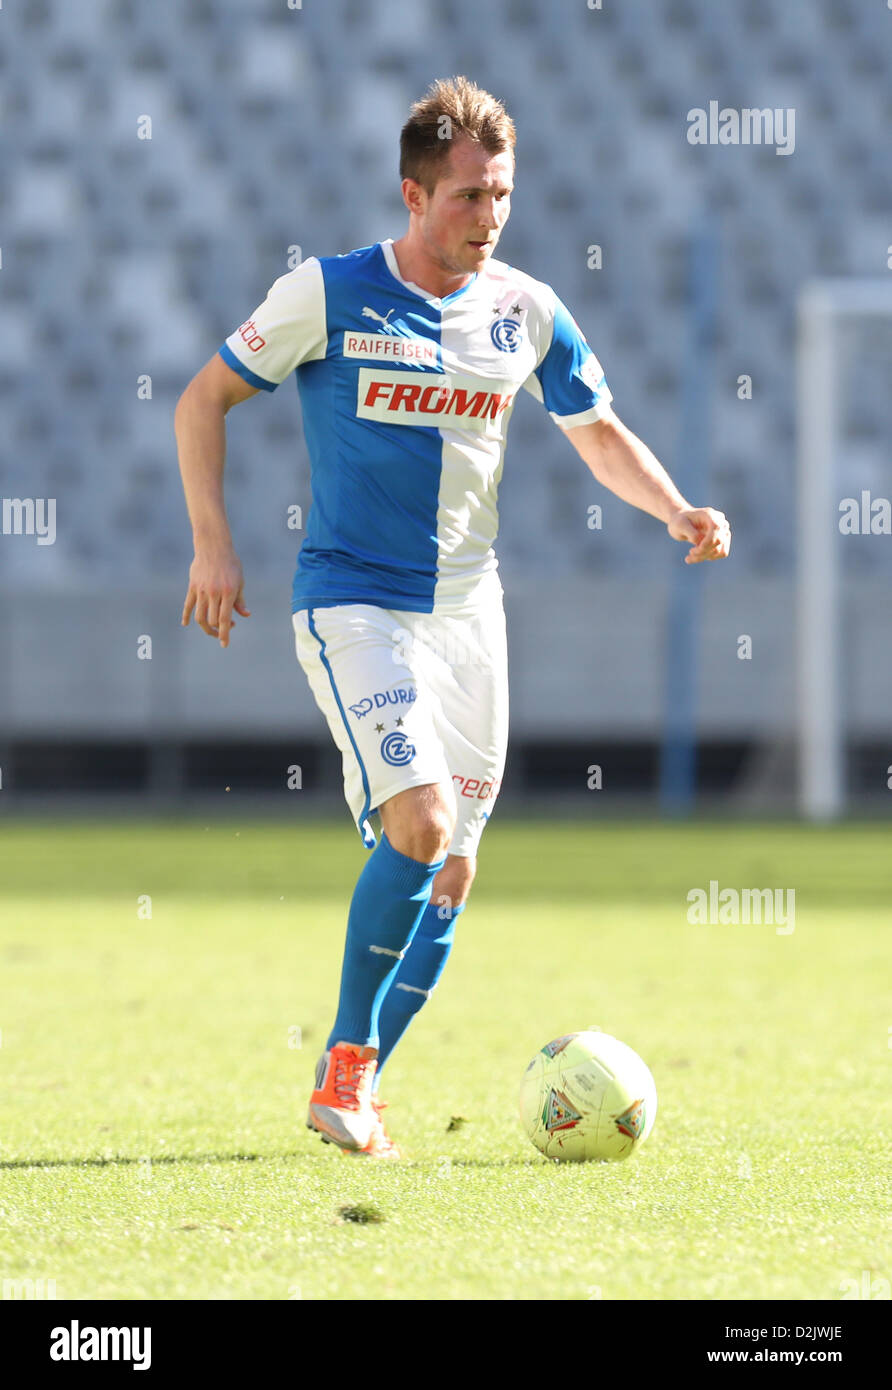 CAPE TOWN, South Africa - Saturday 26 January 2013, Izet Hajrovic of Grasshopper Club Zurich during the soccer/football match Grasshopper Club Zurich (Switzerland) and Ajax Cape Town at the Cape Town stadium. Photo by Roger Sedres/ImageSA/ Alamy Live News Stock Photo